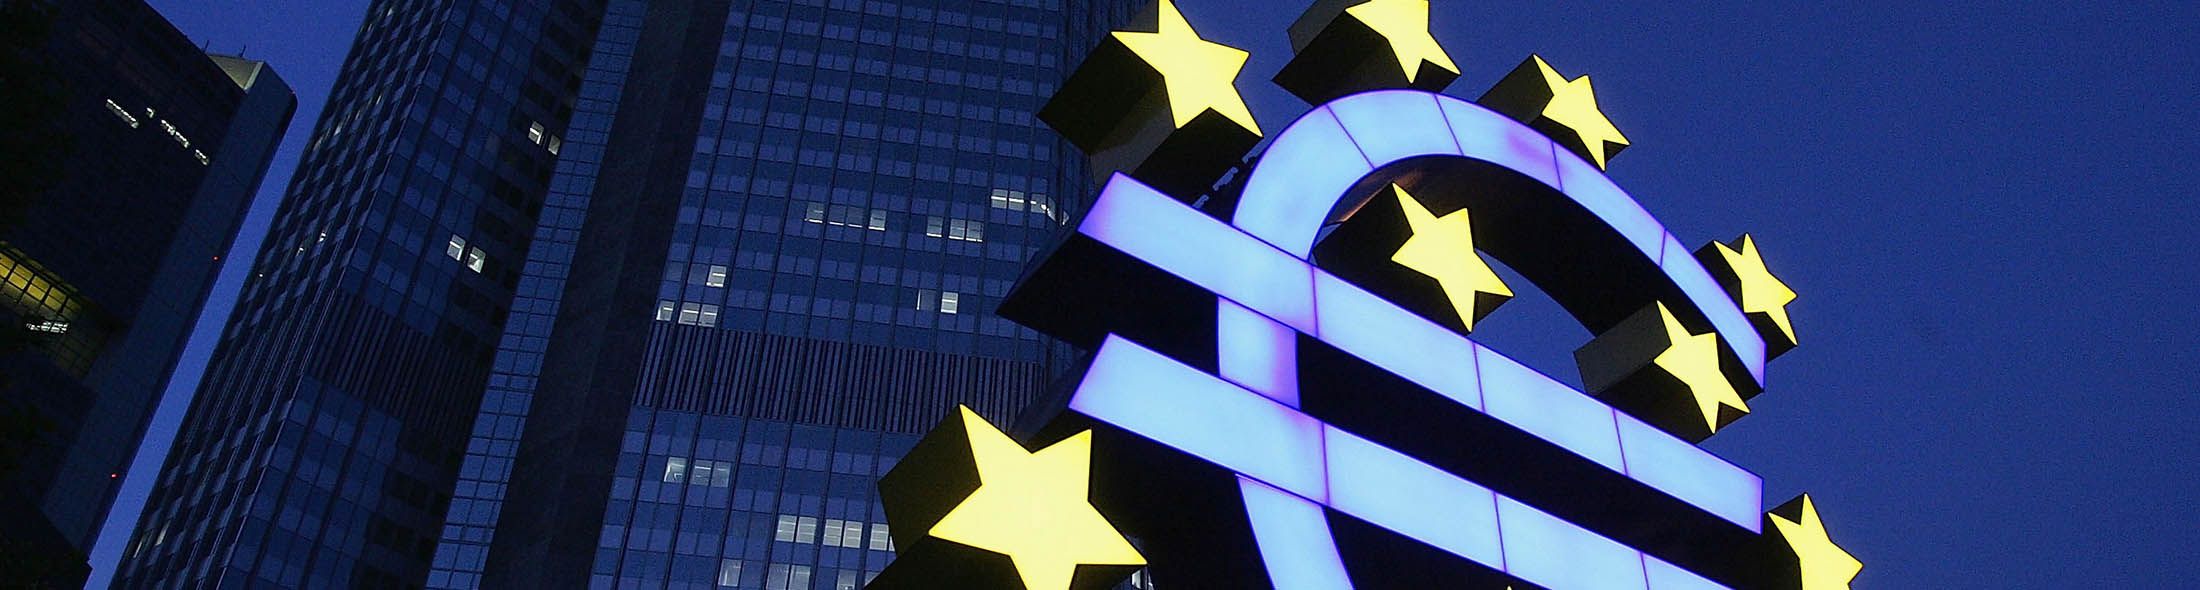 FRANKFURT, GERMANY - JUNE 13: A huge euro logo is seen in front of the headquarters of the European Central Bank (ECB) on June 13, 2005 in Frankfurt, Germany. The German economy was suffering due to the dollar's rise against most major currencies on Monday, especially the euro, which hit a new nine-month low against the dollar.
